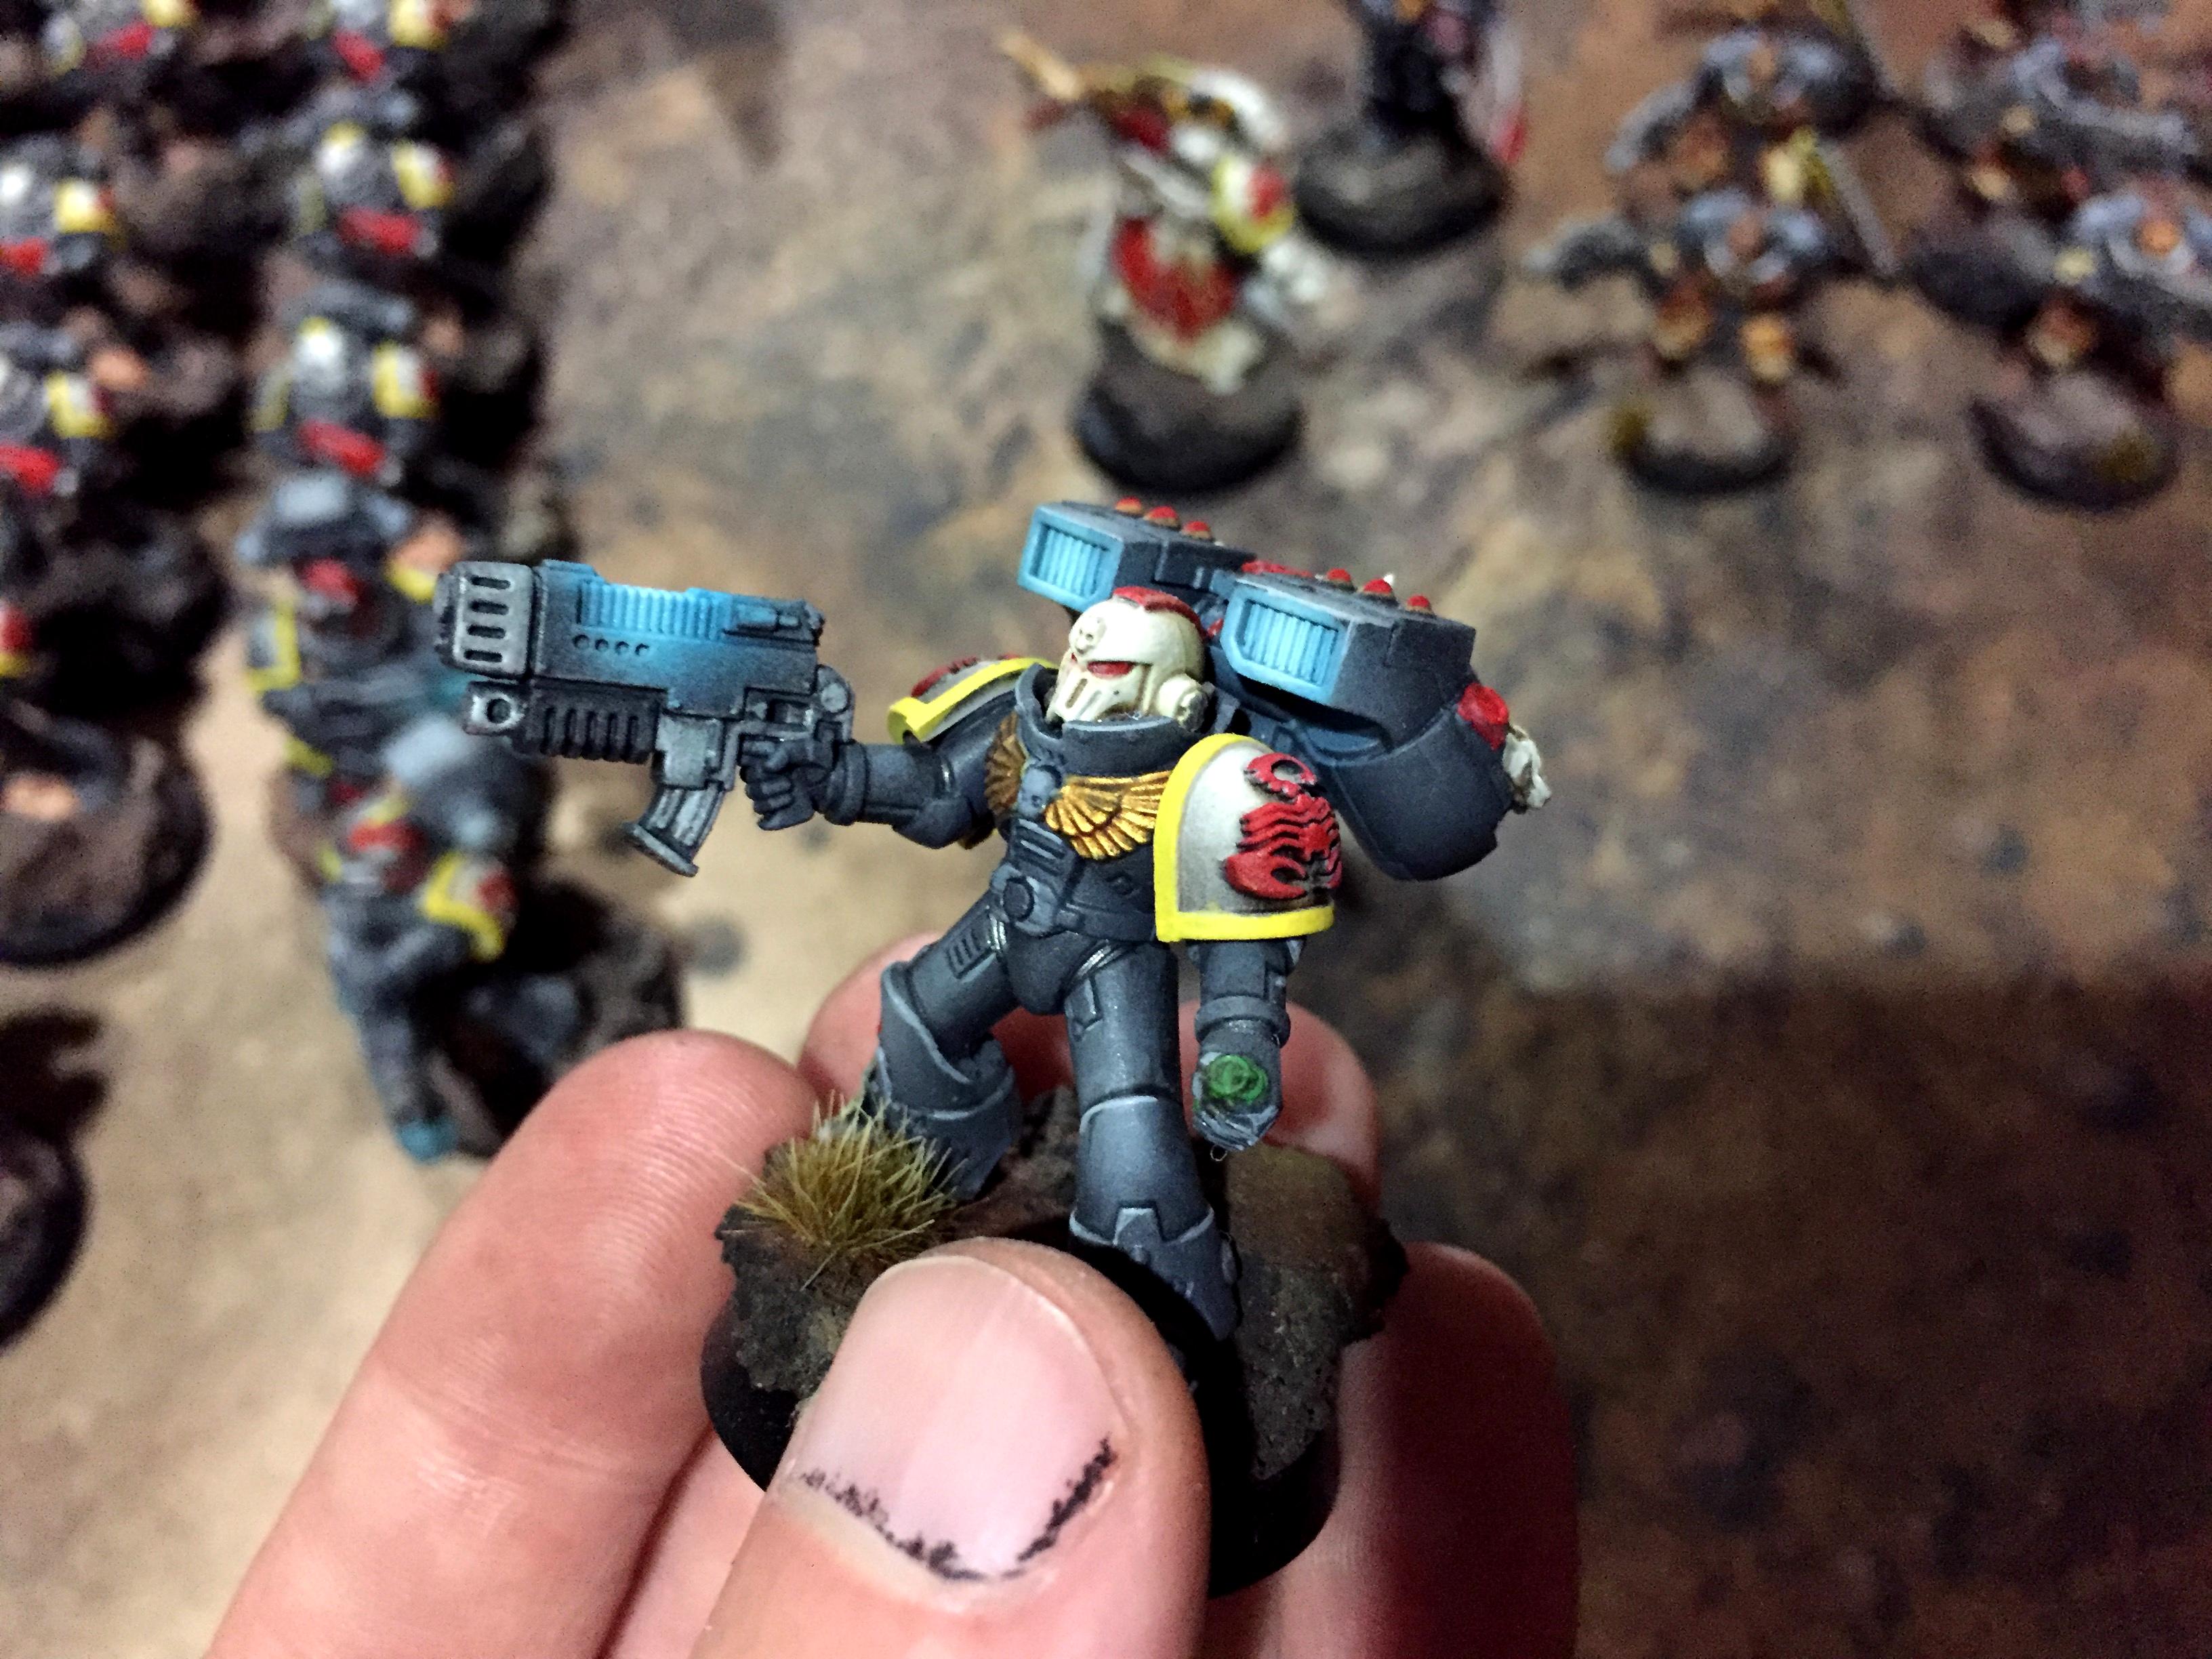 Red Scorpions, Space Marines